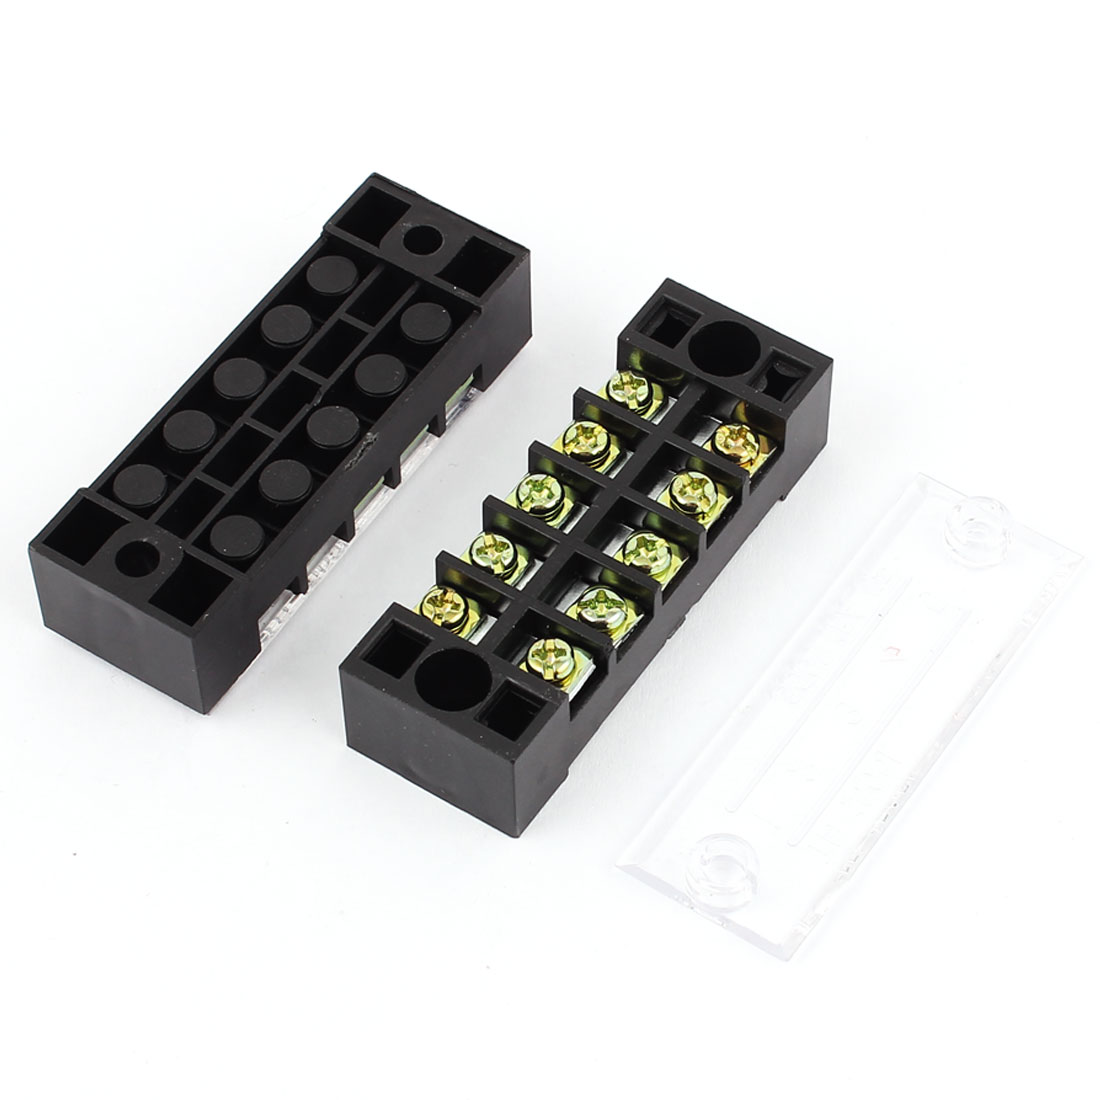 2pcs 600V 15A 5P Dual Row Electric Barrier Terminal Block Cable Connector Bar - image 4 of 4